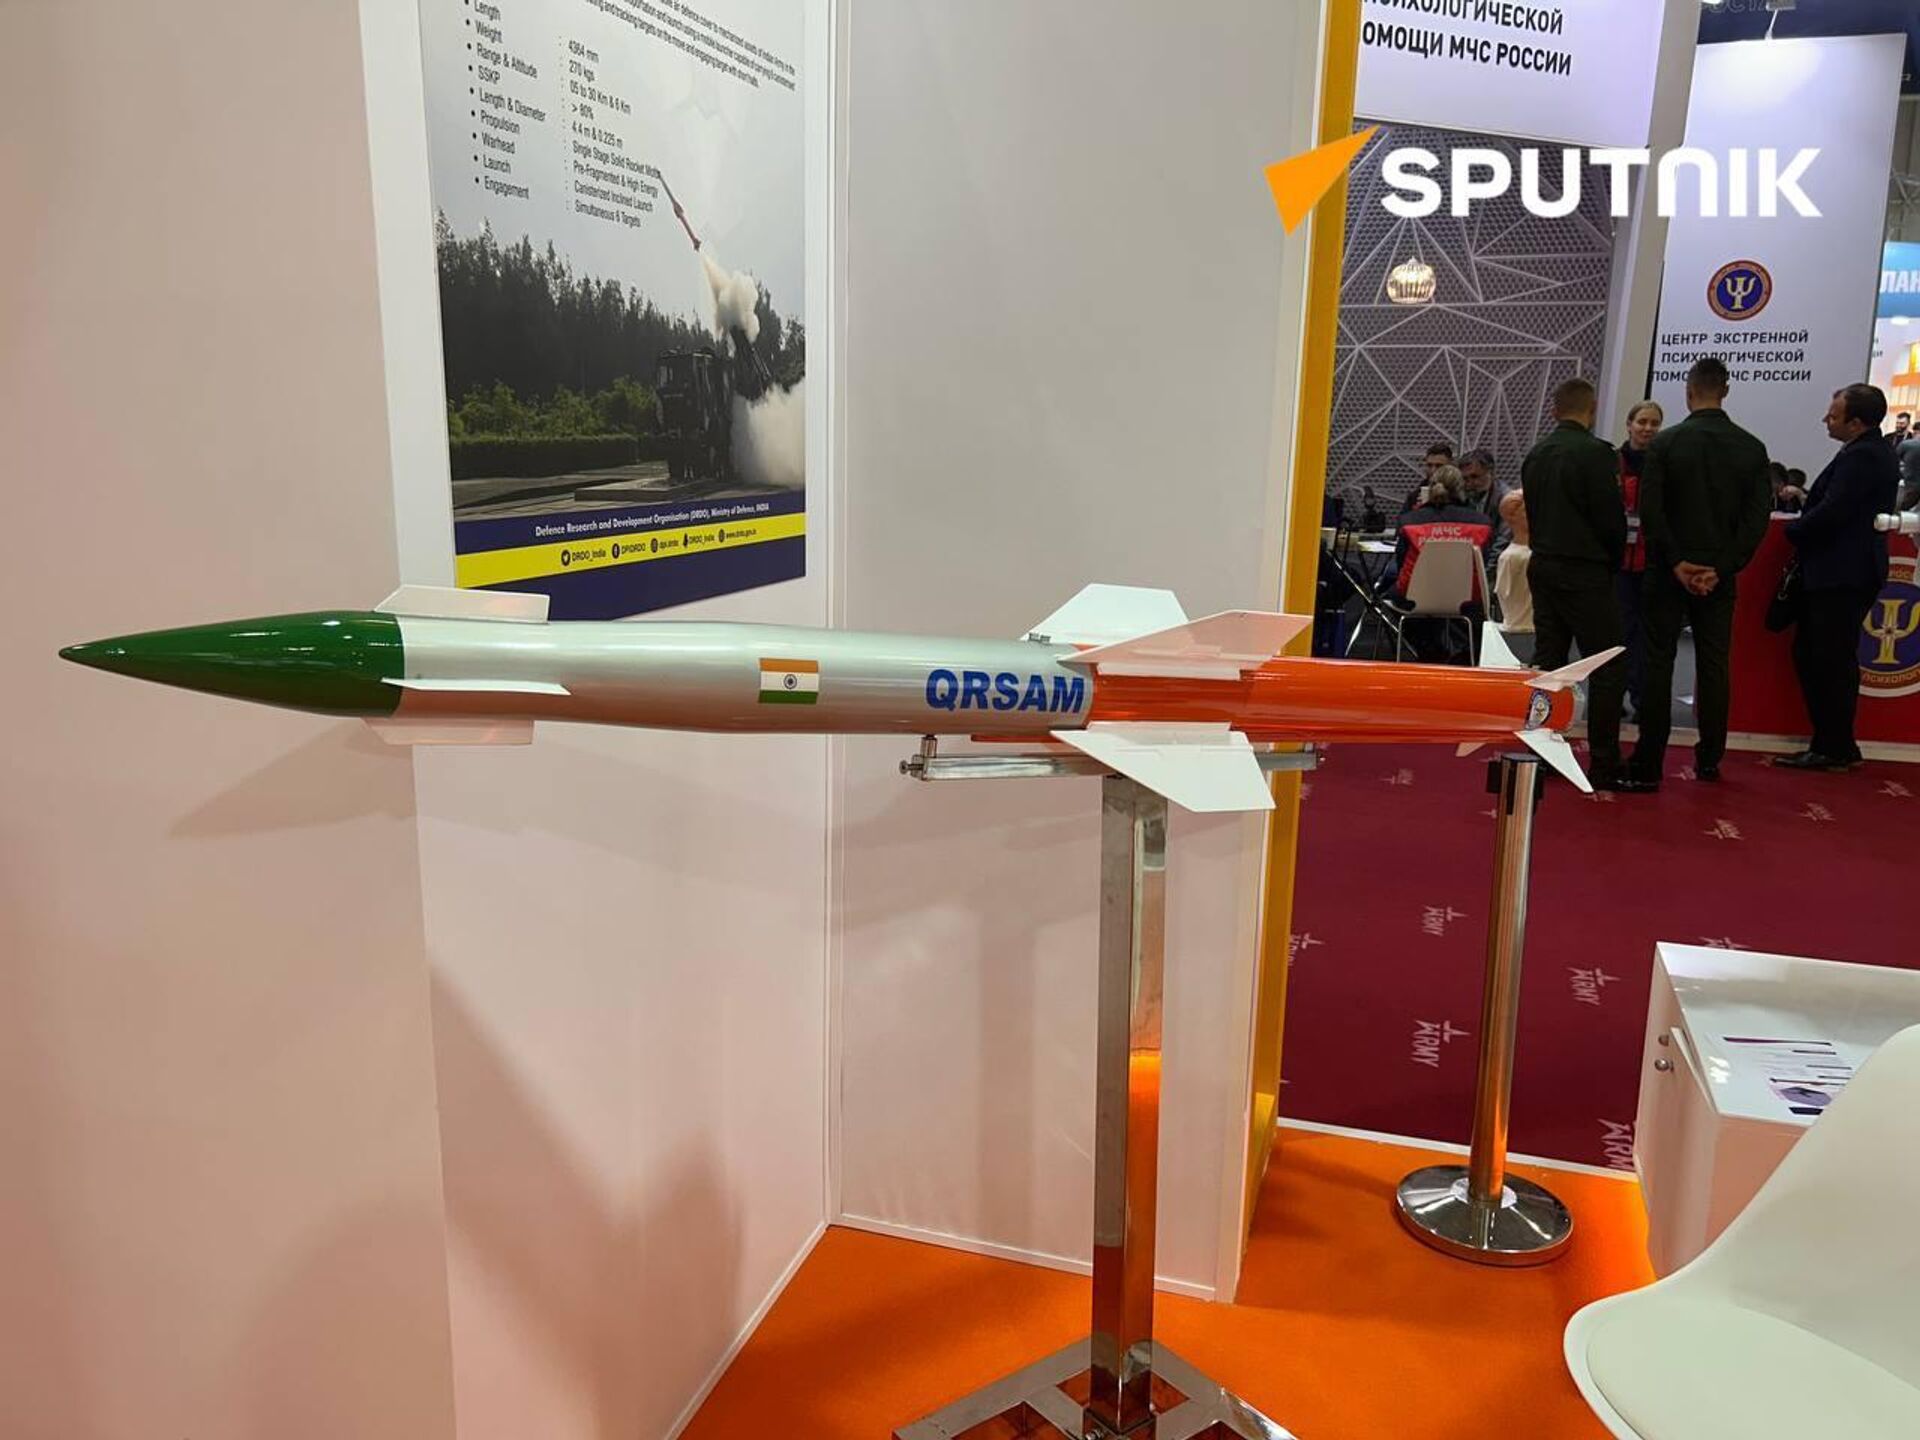 India Showcases QRSAM Anti-Aircraft Missile System at the exhibition at Army-2023 Expo - Sputnik India, 1920, 15.08.2023